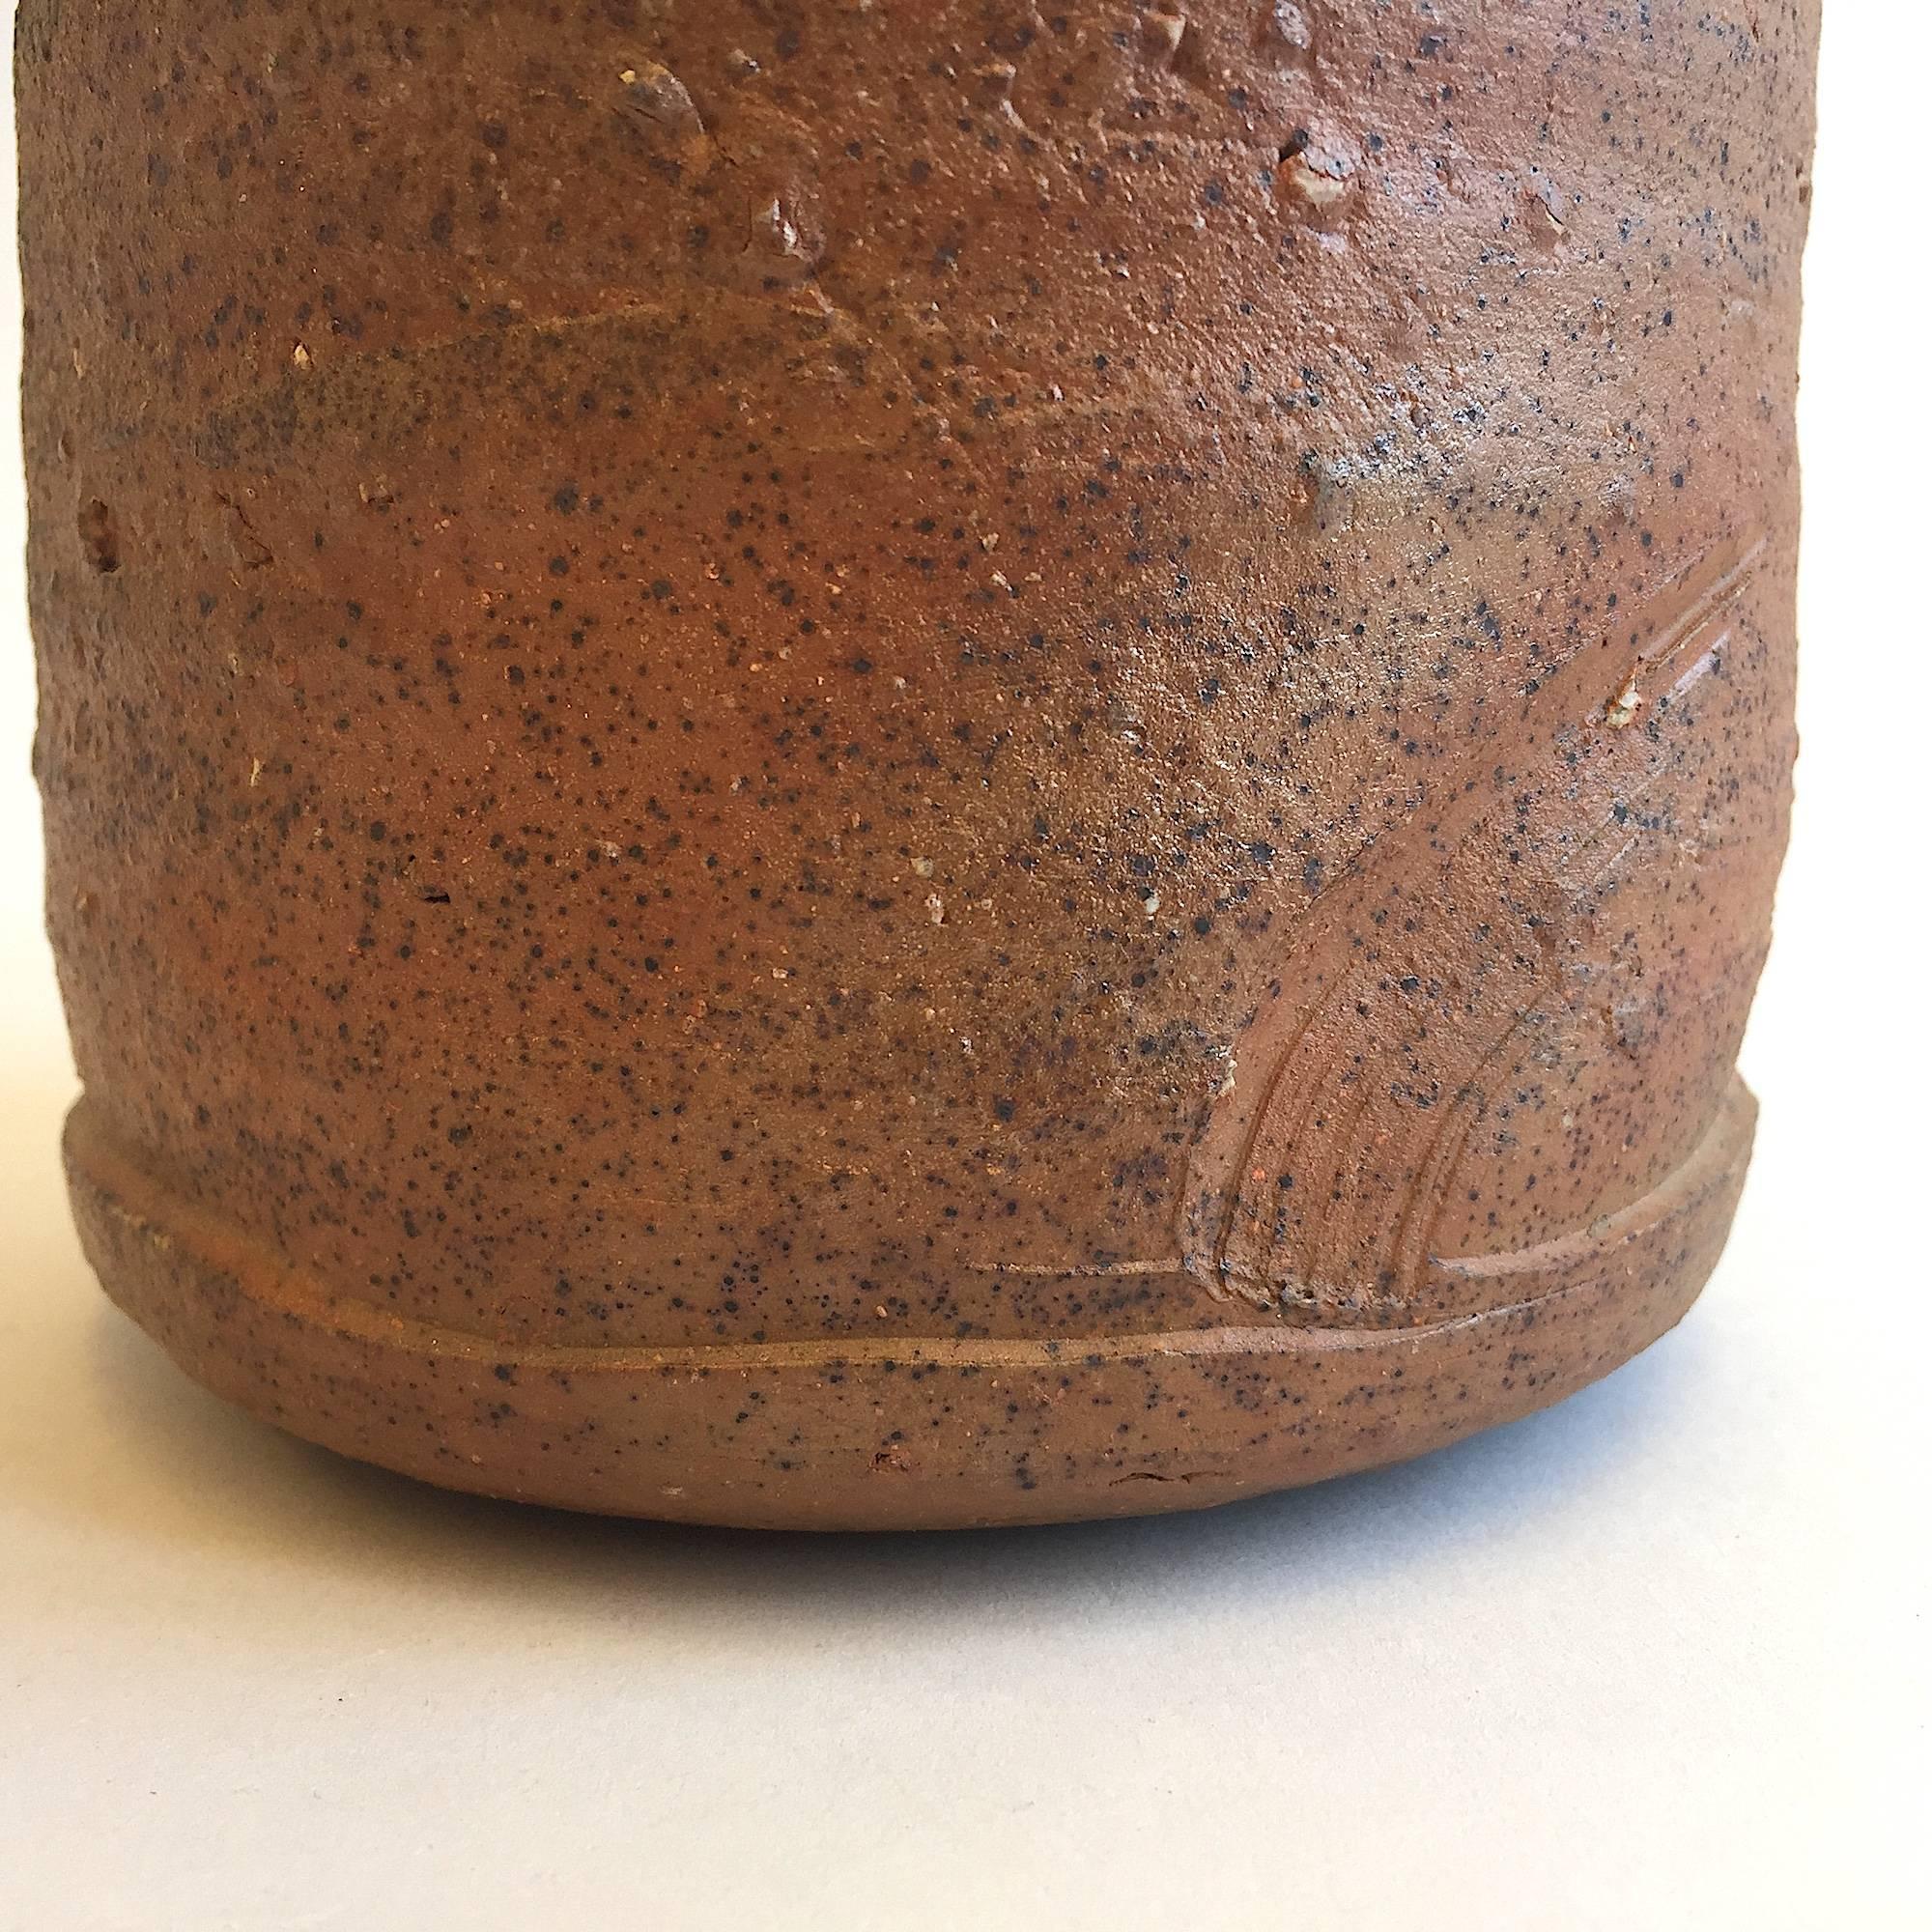 Horst Kerstan
(1941-2005 Kandern, Germany)

Unique minimalist art pottery wood-fired ceramic vase. Made in the first Japanese anagama wood oven in Germany after his trip to Japan. Red clay. Partial incised decor. Fire glaze.

Measures: H 14.5 x